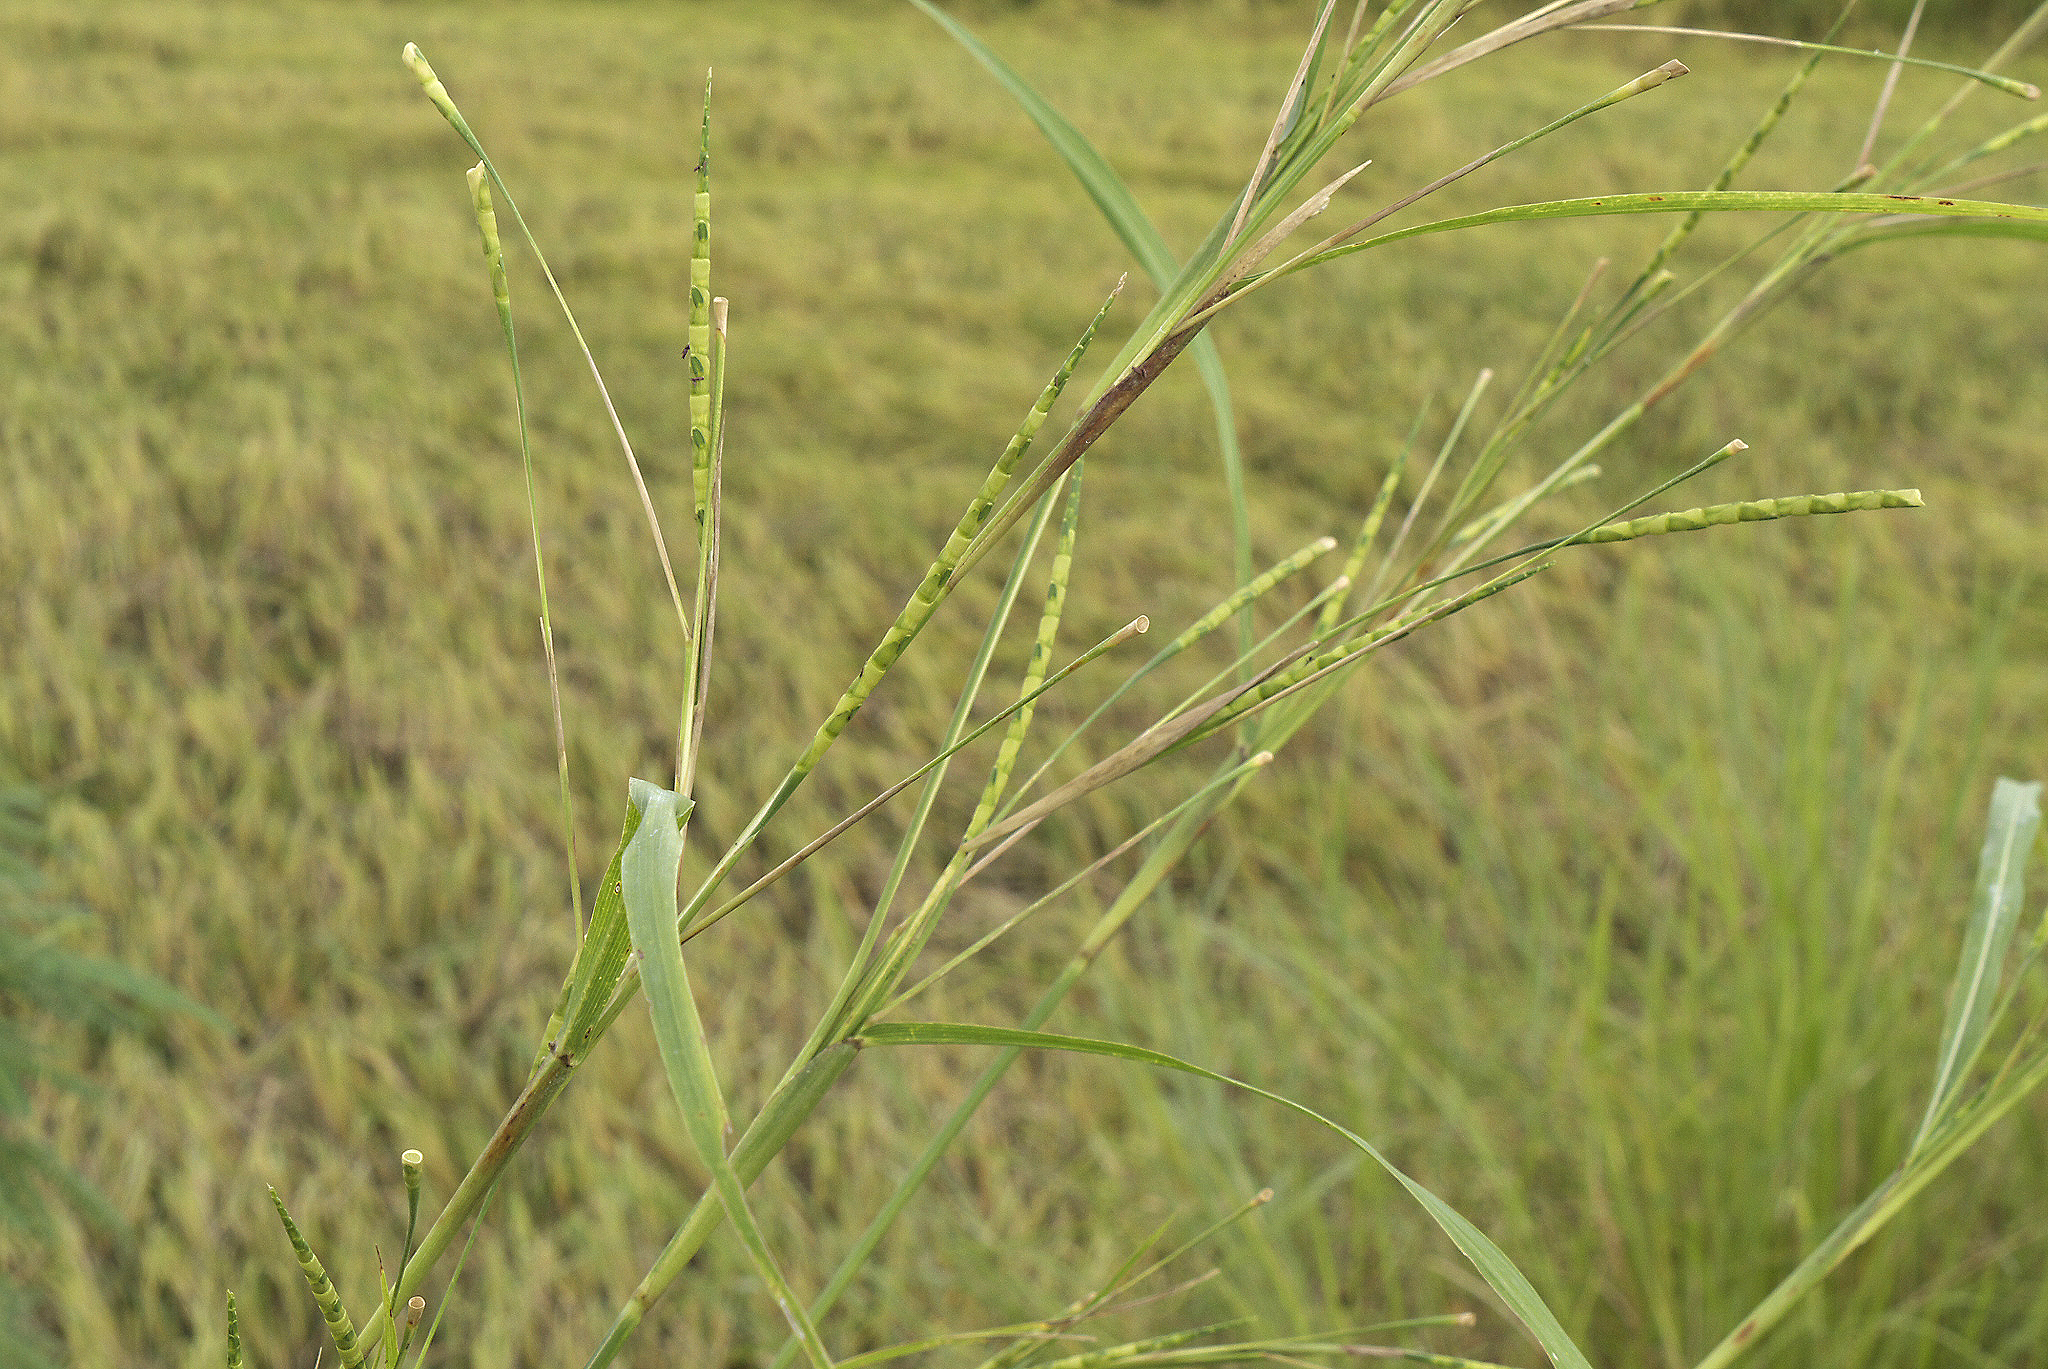 Photograph of itchgrass growing in a field in Thailand. The photo shows a close-up of the inflorescences, which are cylindrical.